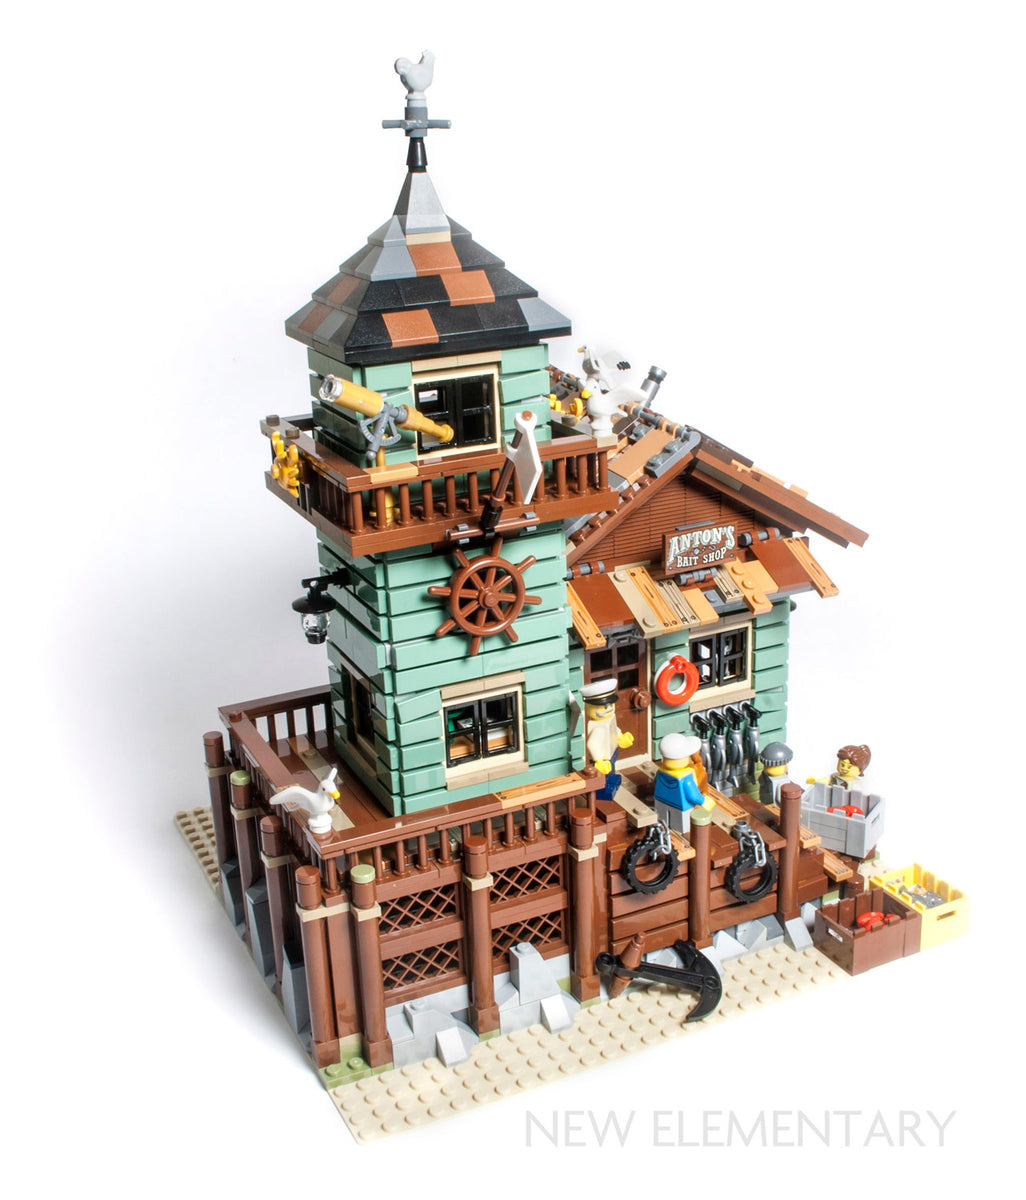 lego ideas old fishing store 21310